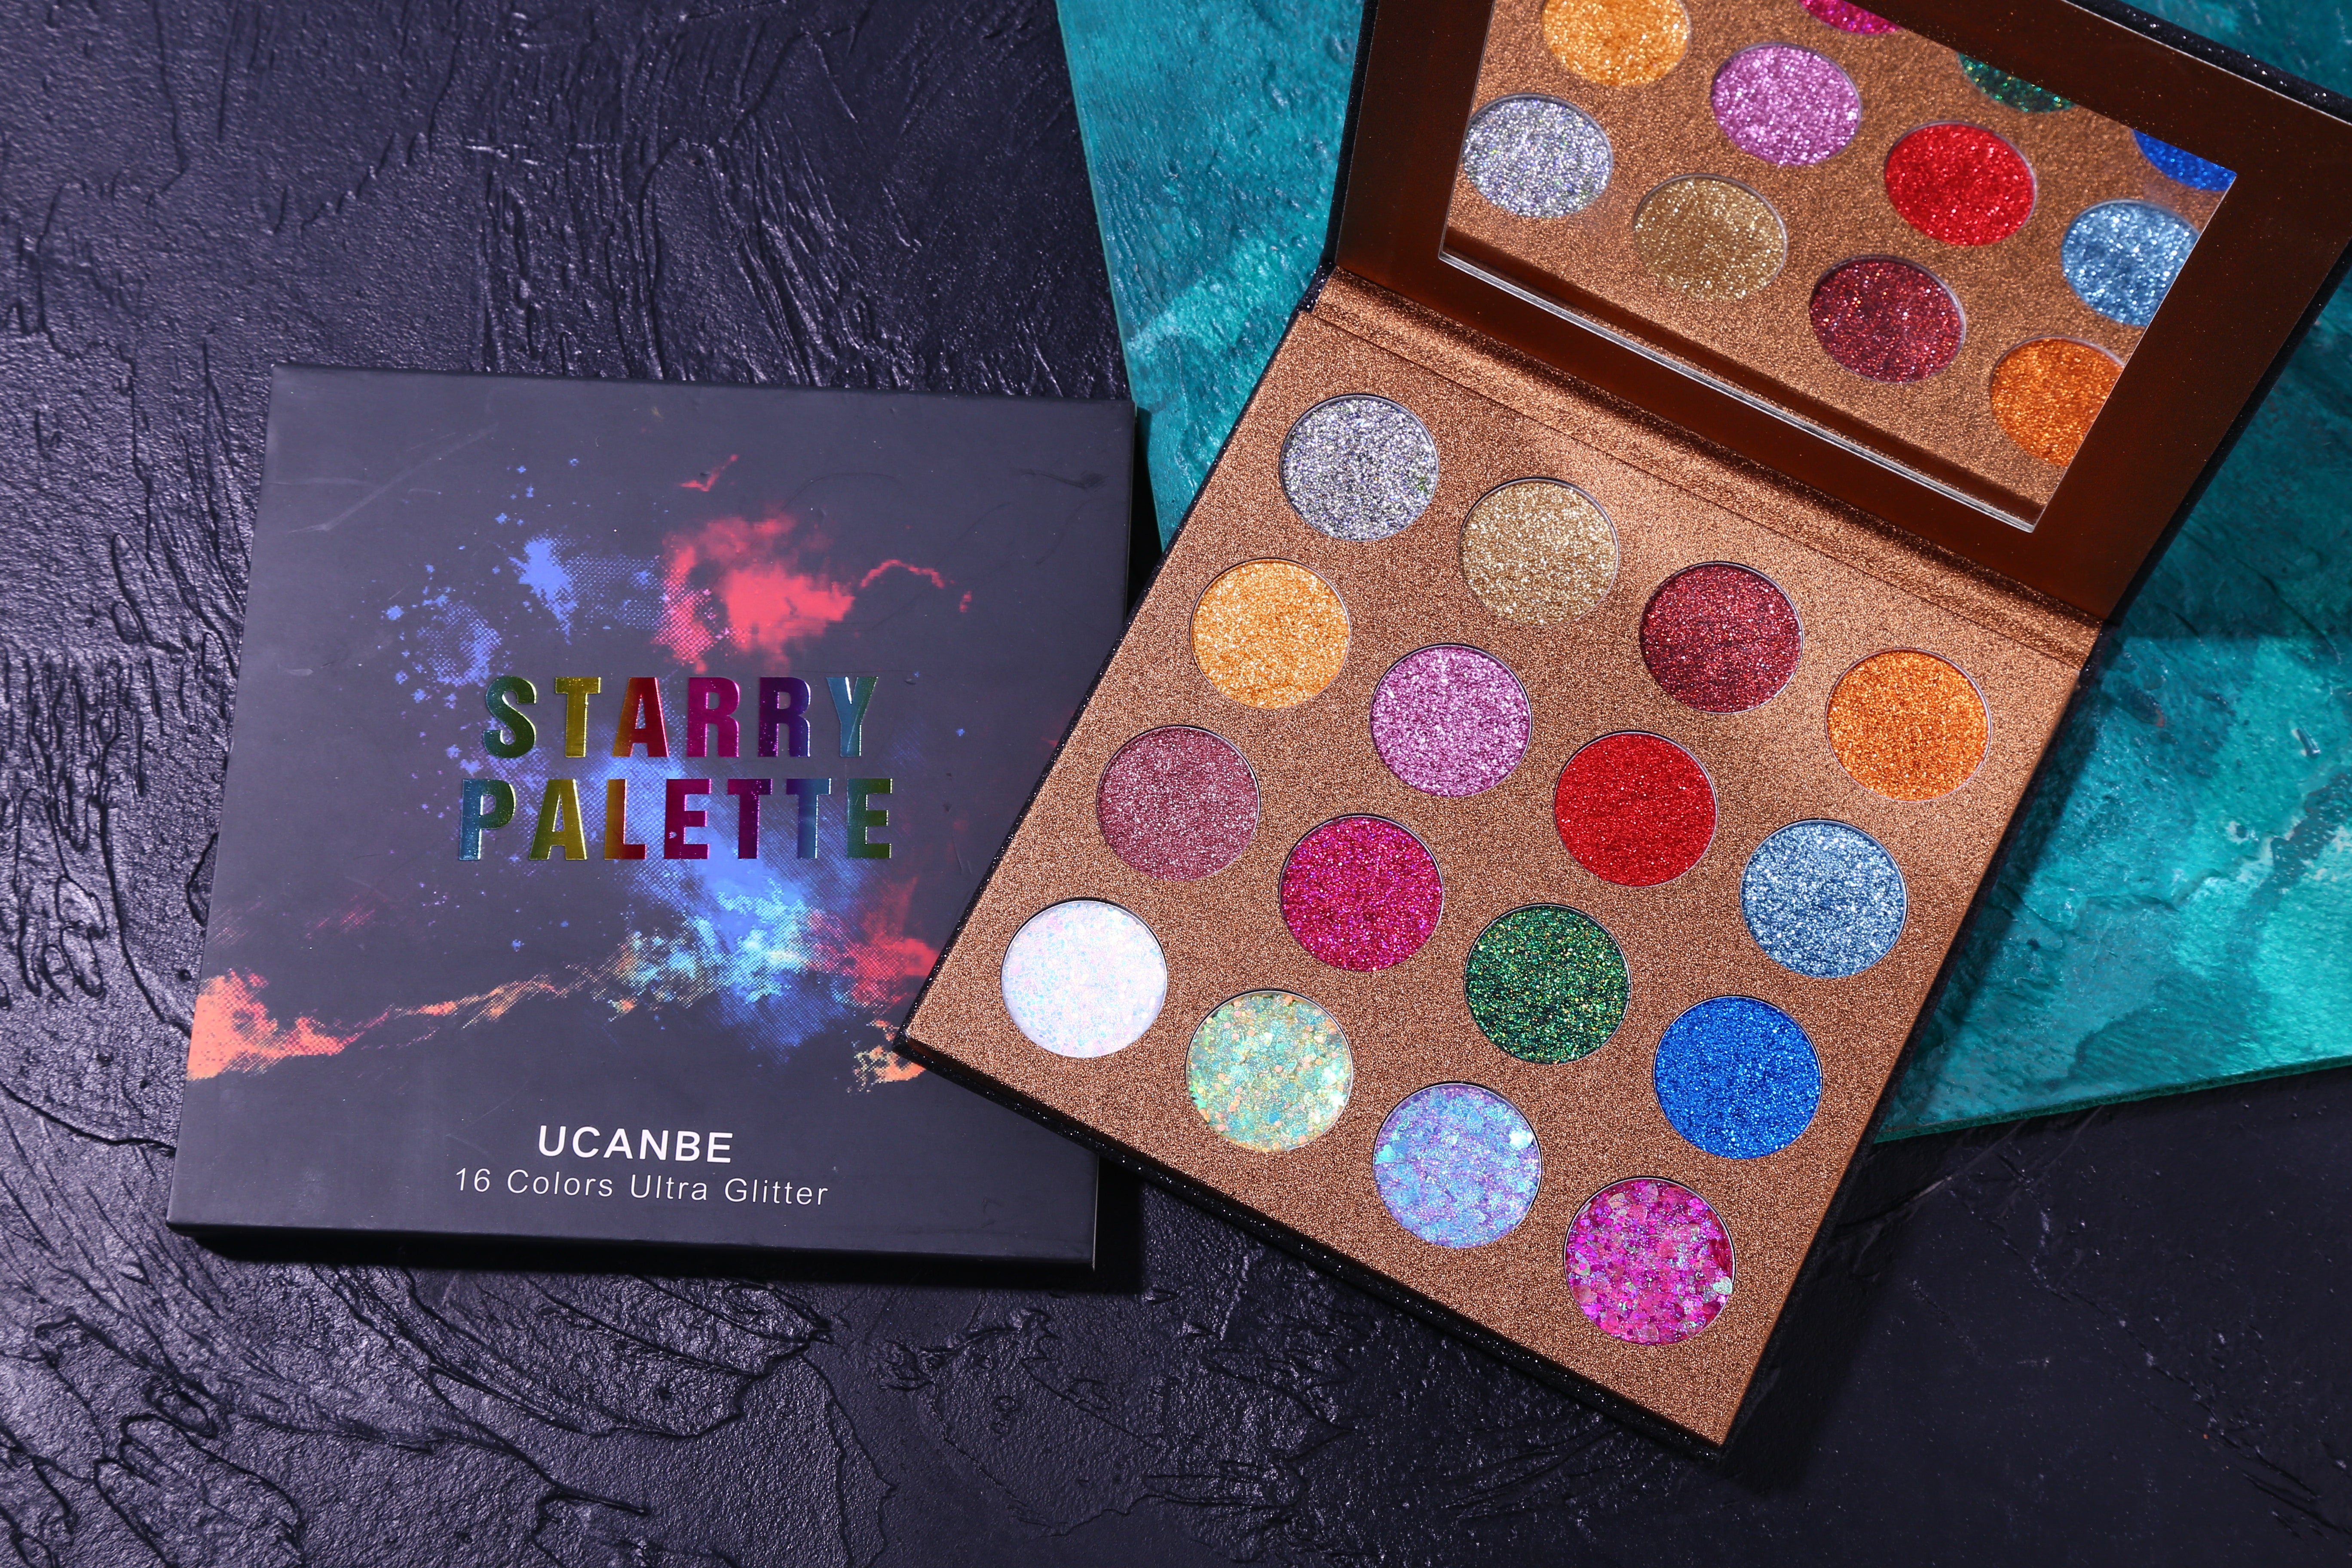  142 Colors Pigmented Shimmer Matte Eyeshadow Palette